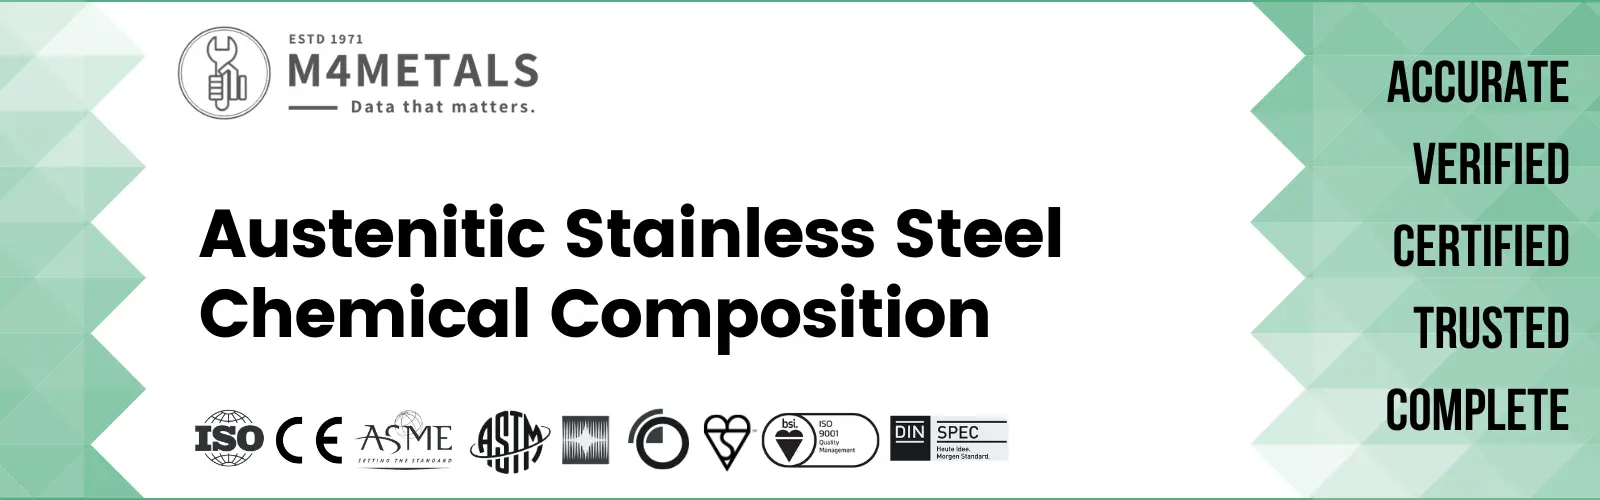 Austenitic Stainless Steel Chemical Composition